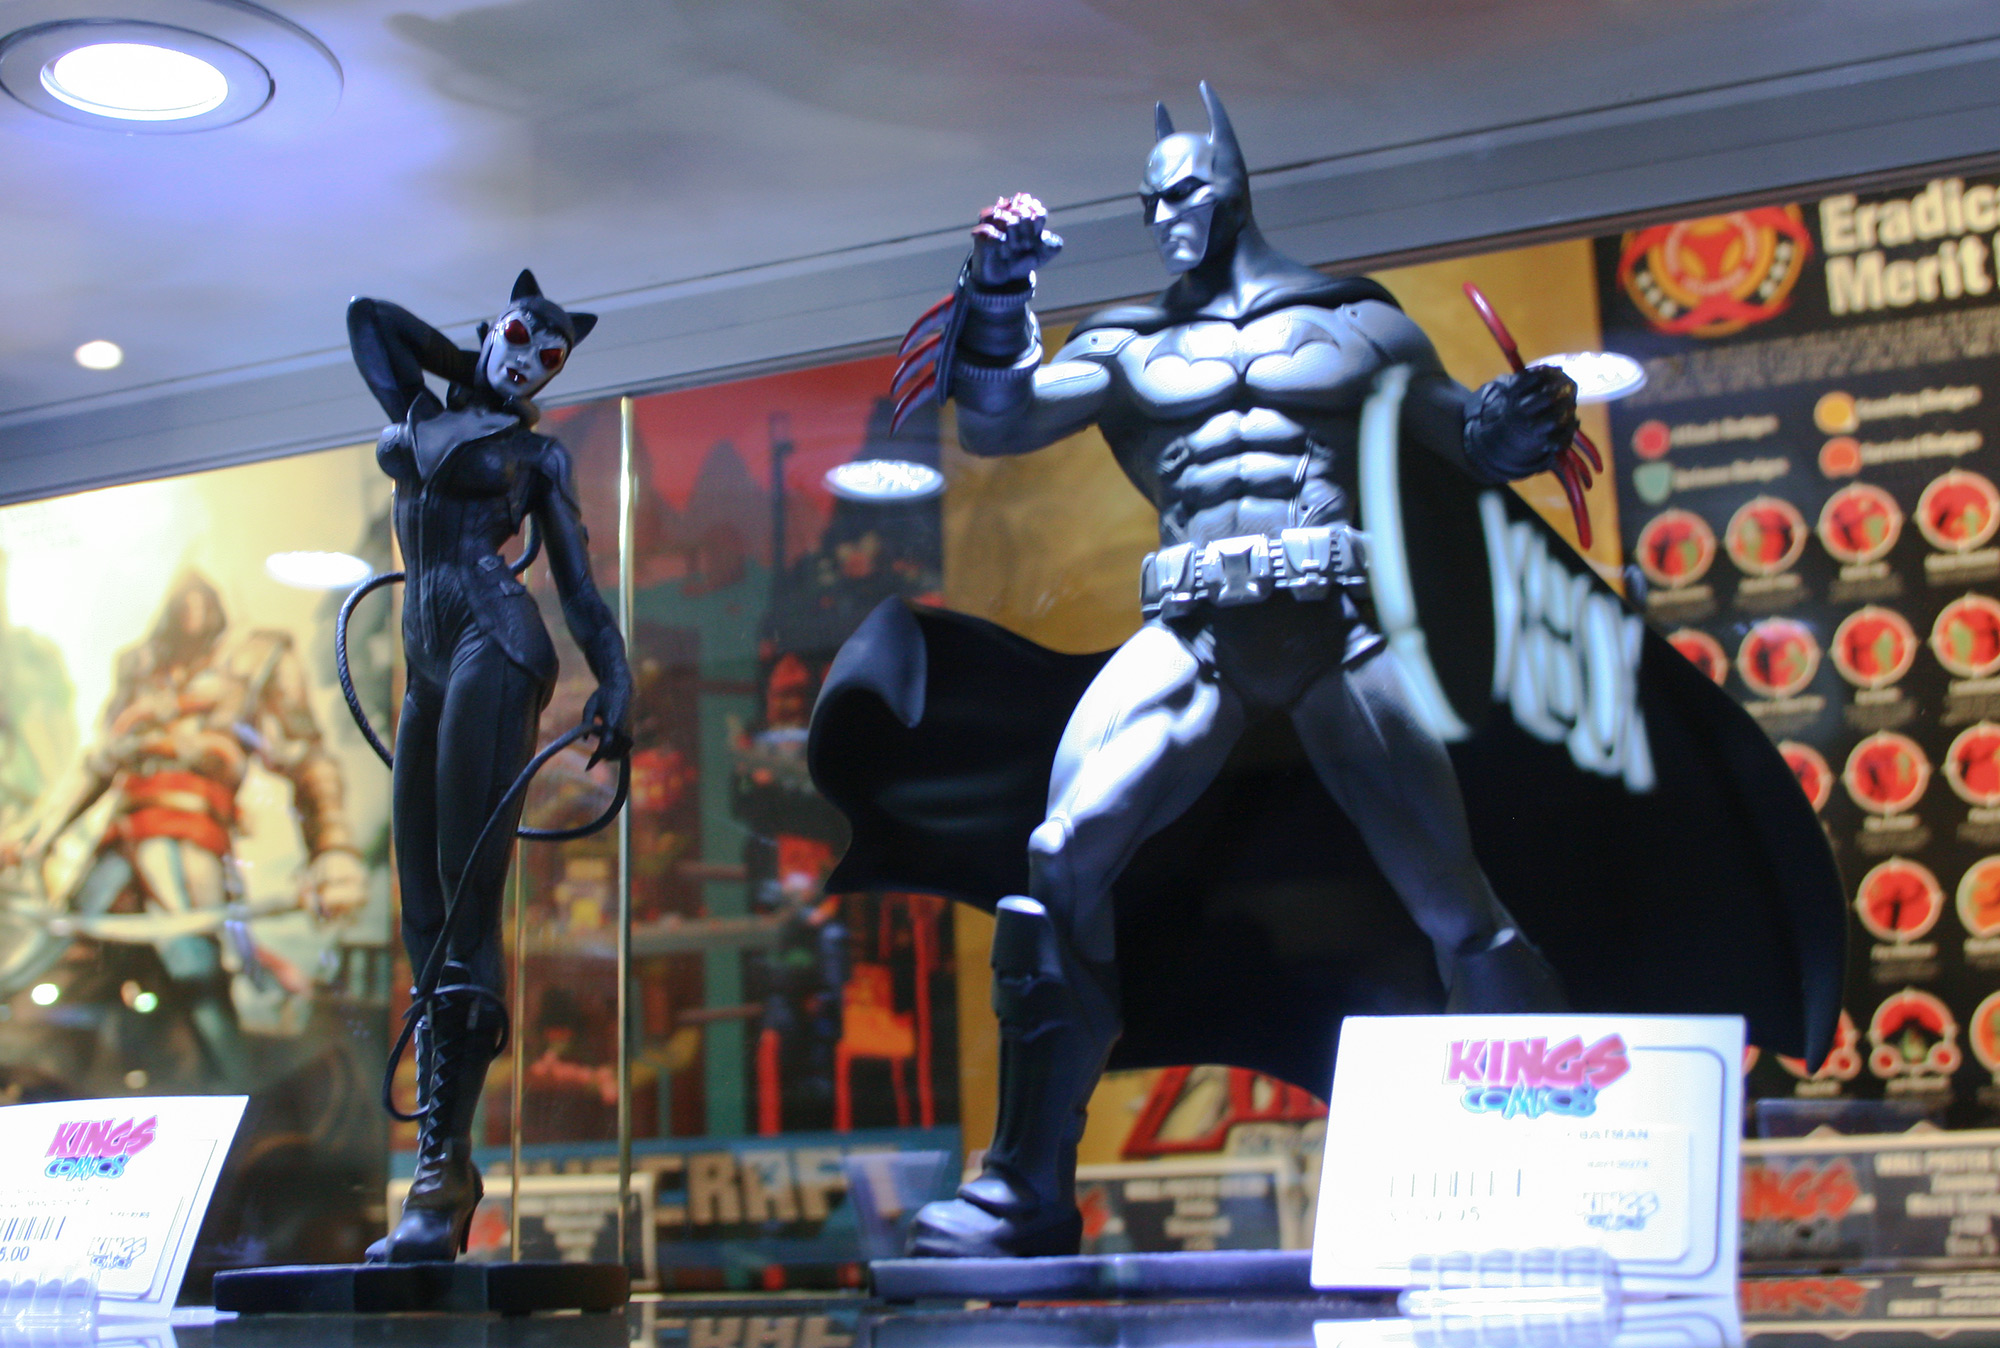 PAX Aus - Melbourne 2014 - Batman and Catwoman at Kings Comics booth